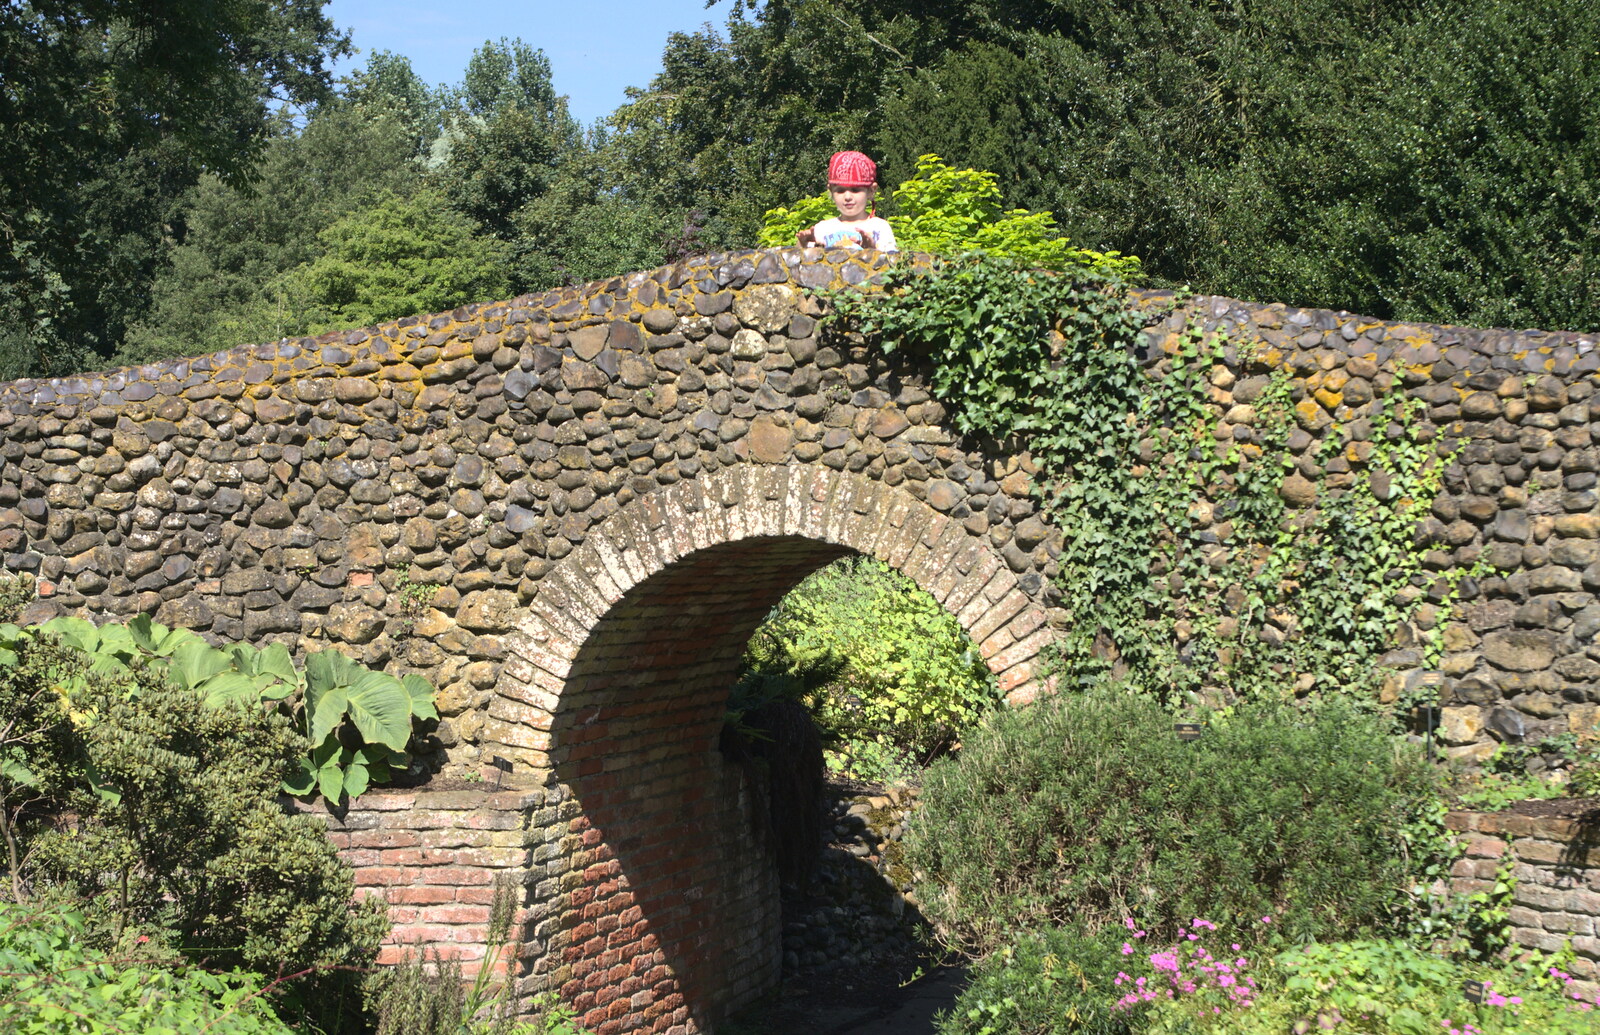 Fred peers out from the bridge from Bressingham Gardens, and Building Progress, Brome, Suffolk - 26th August 2013